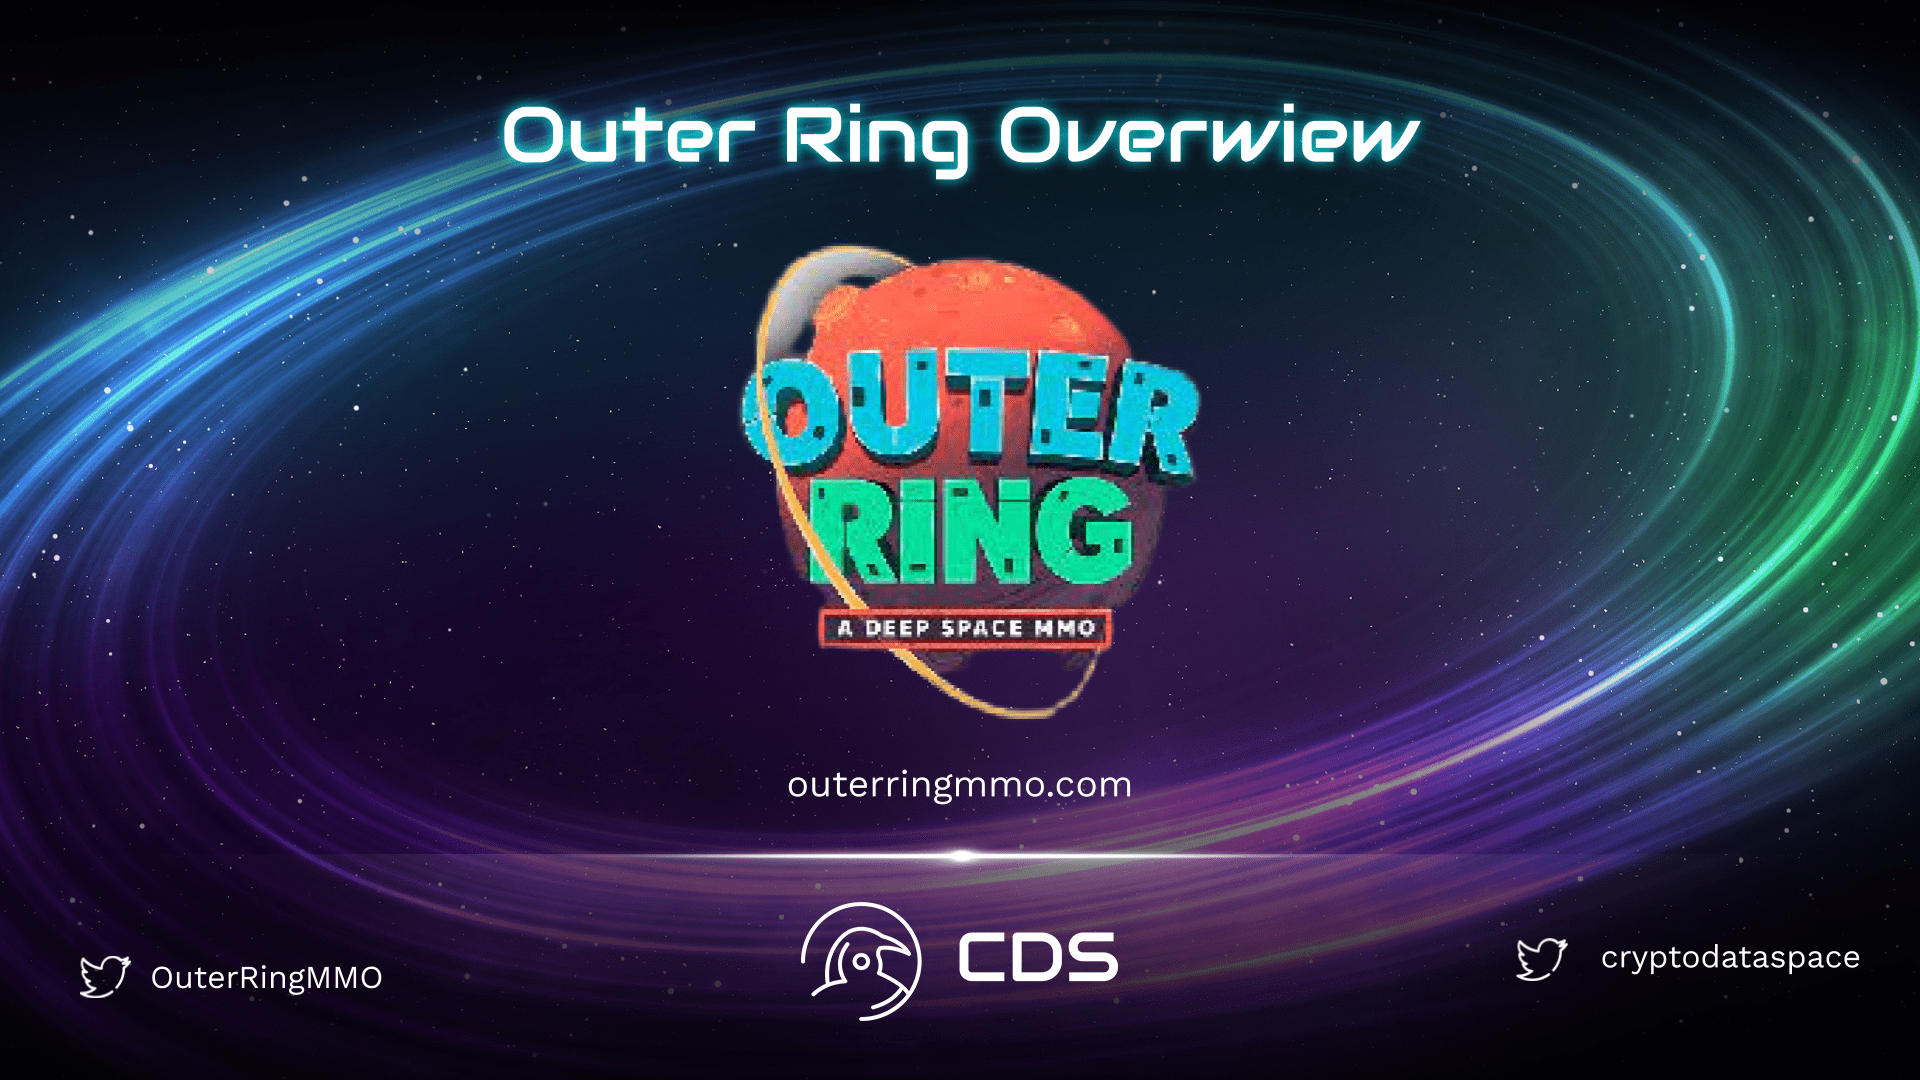 Outer Ring Overwiew